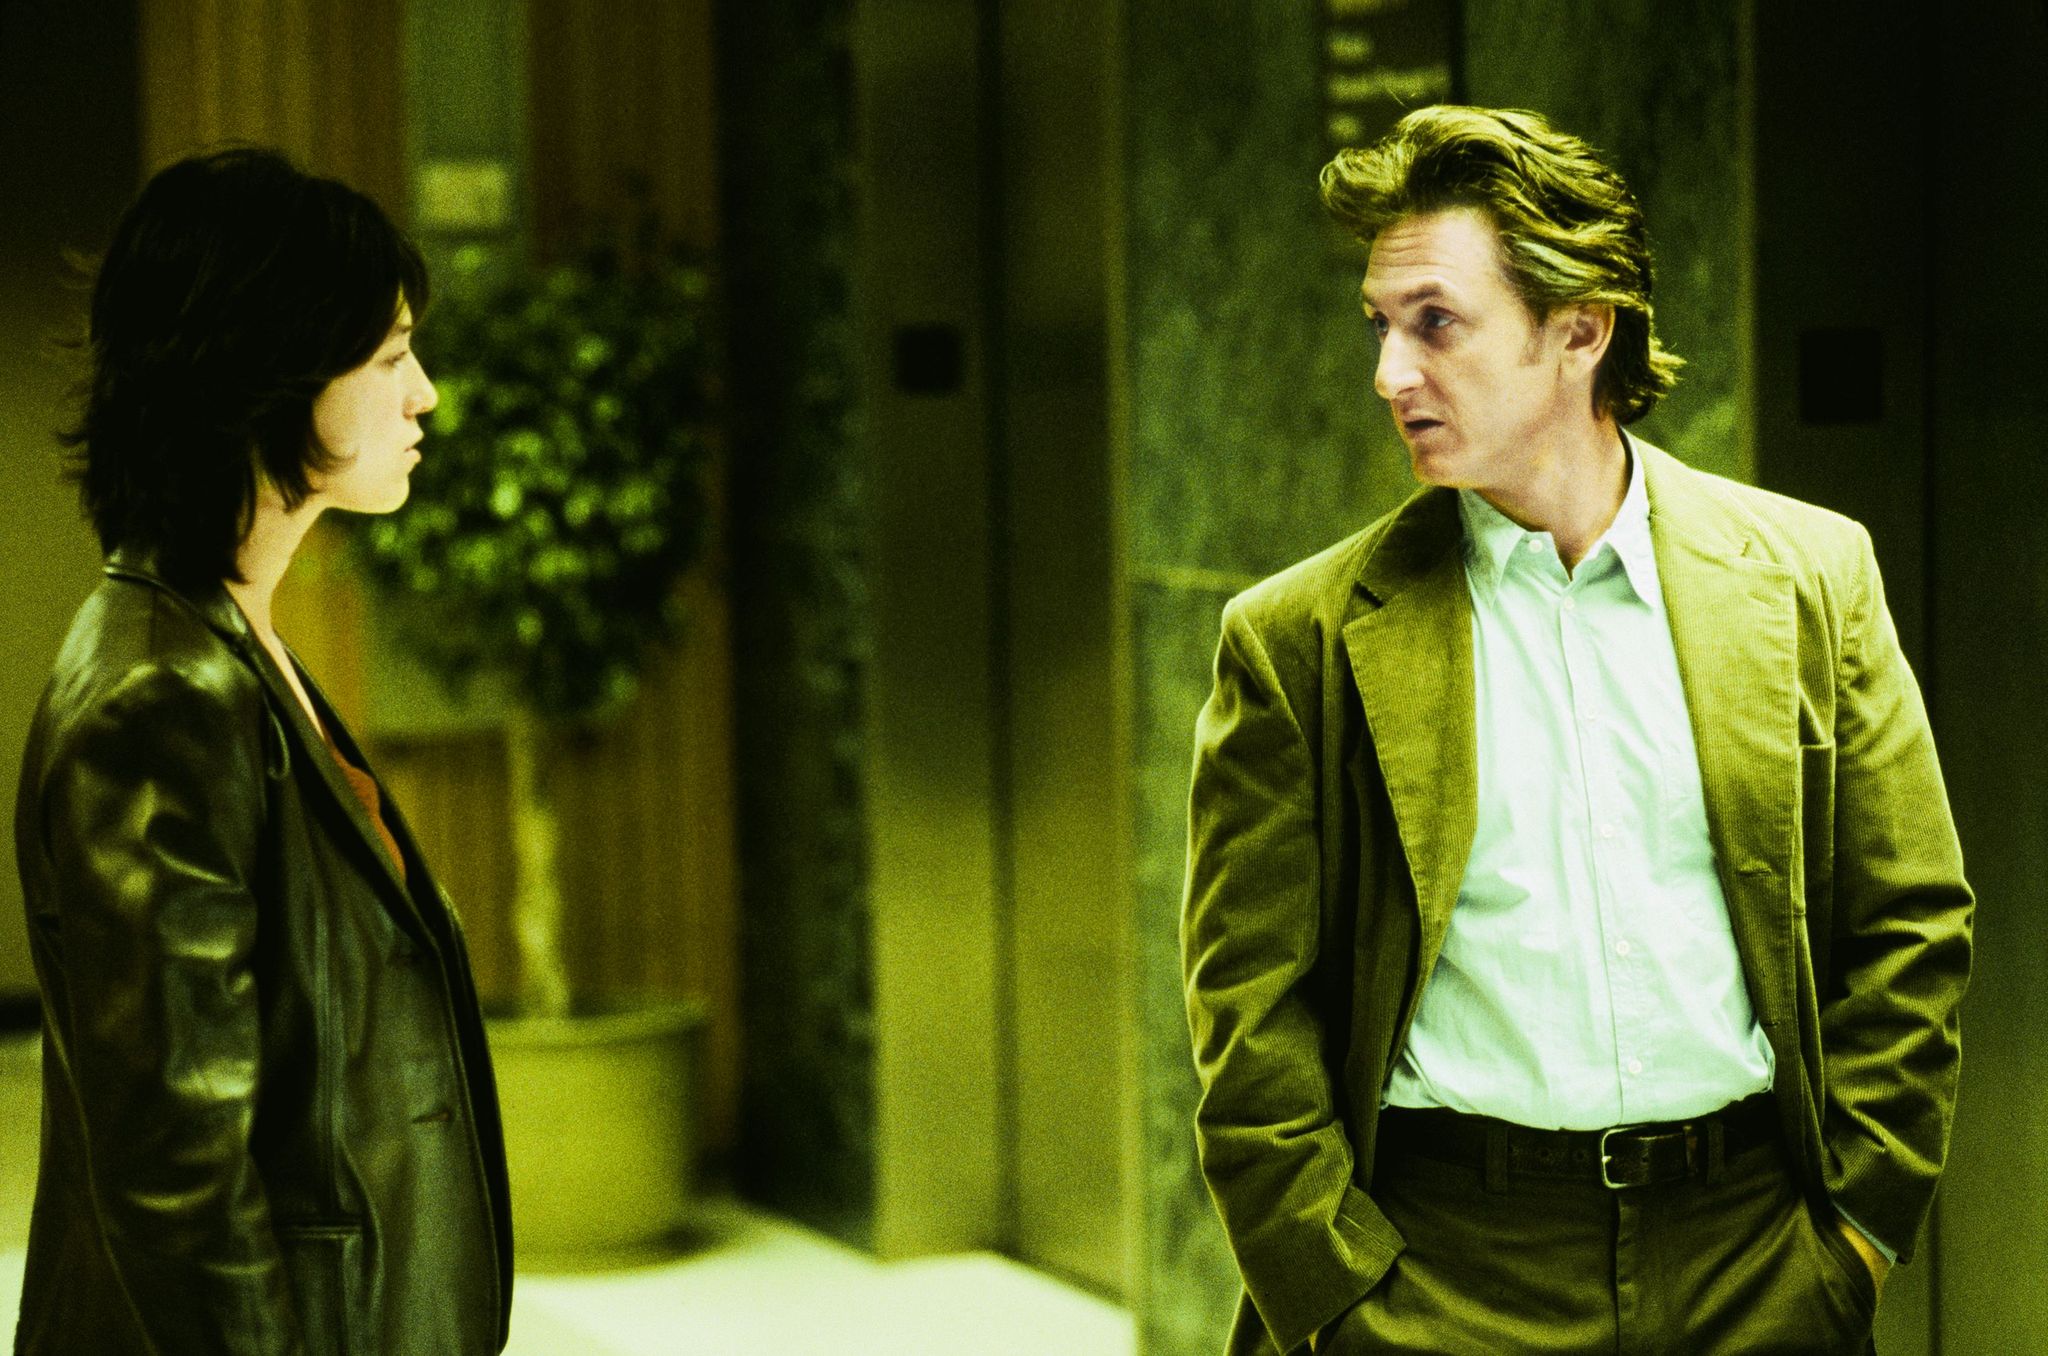 Still of Sean Penn and Charlotte Gainsbourg in 21 gramas (2003)